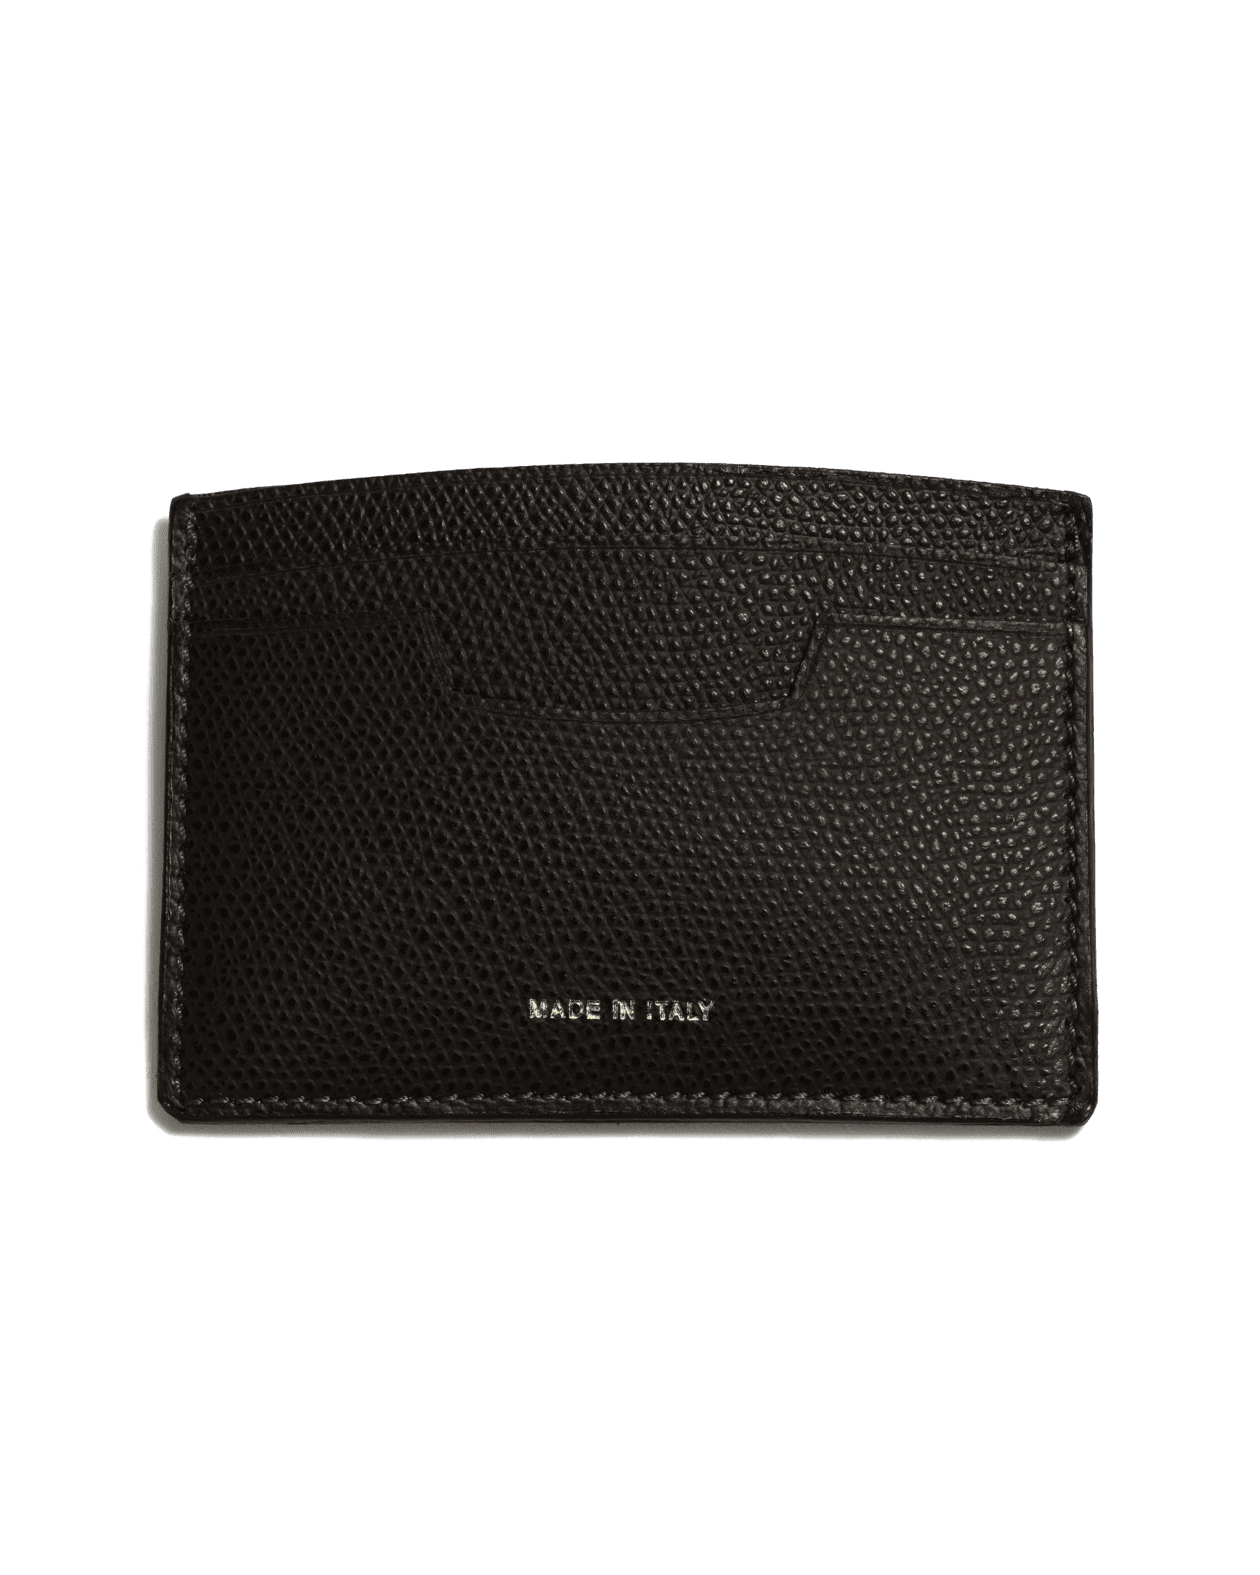 Card Holder Brown Saffiano Leather